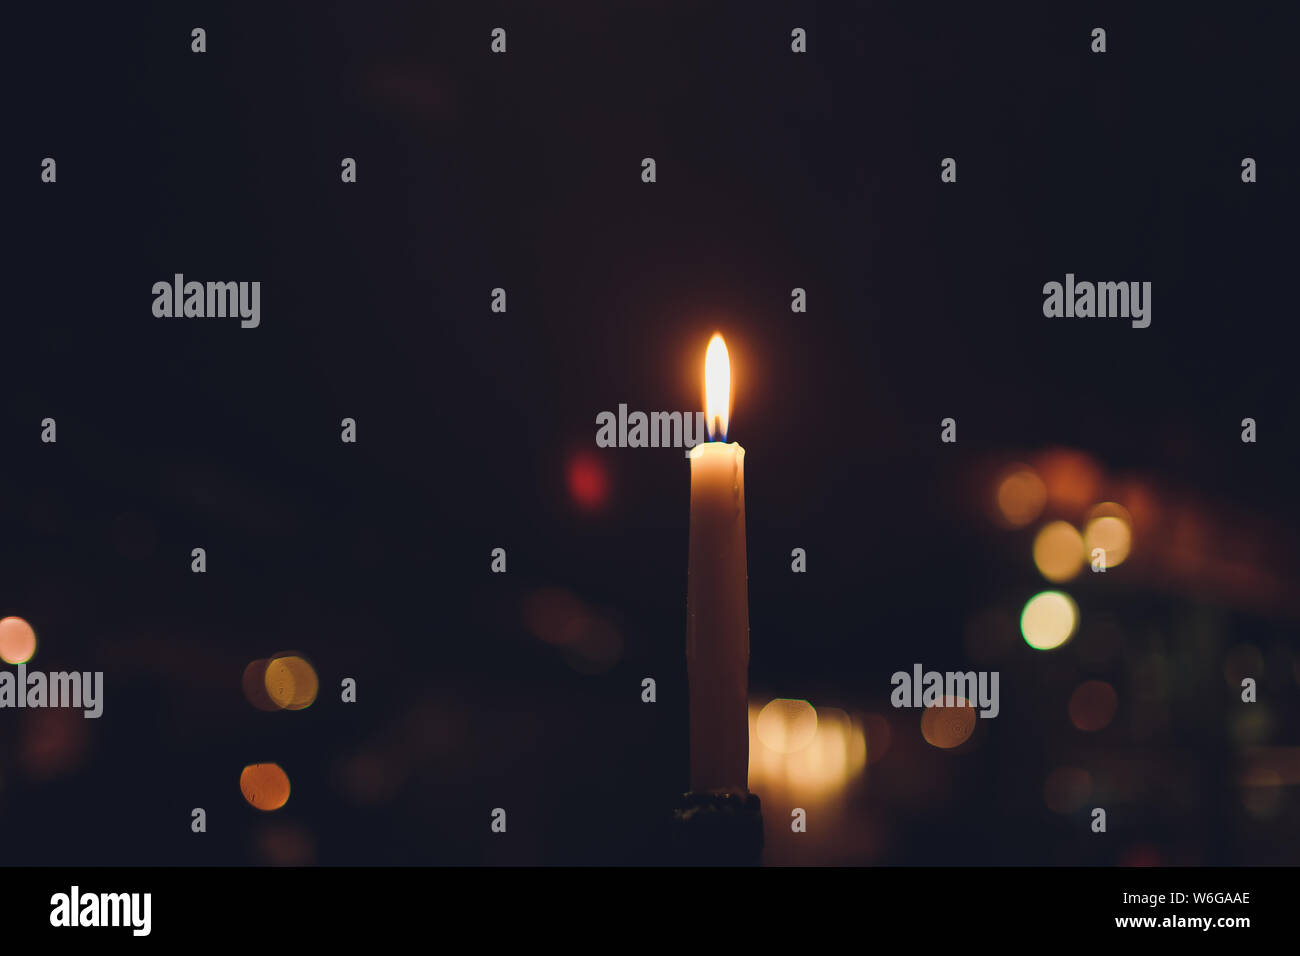 Candles Burning at Night. White Candles Burning in the Dark with focus on  single candle in foreground Stock Photo - Alamy